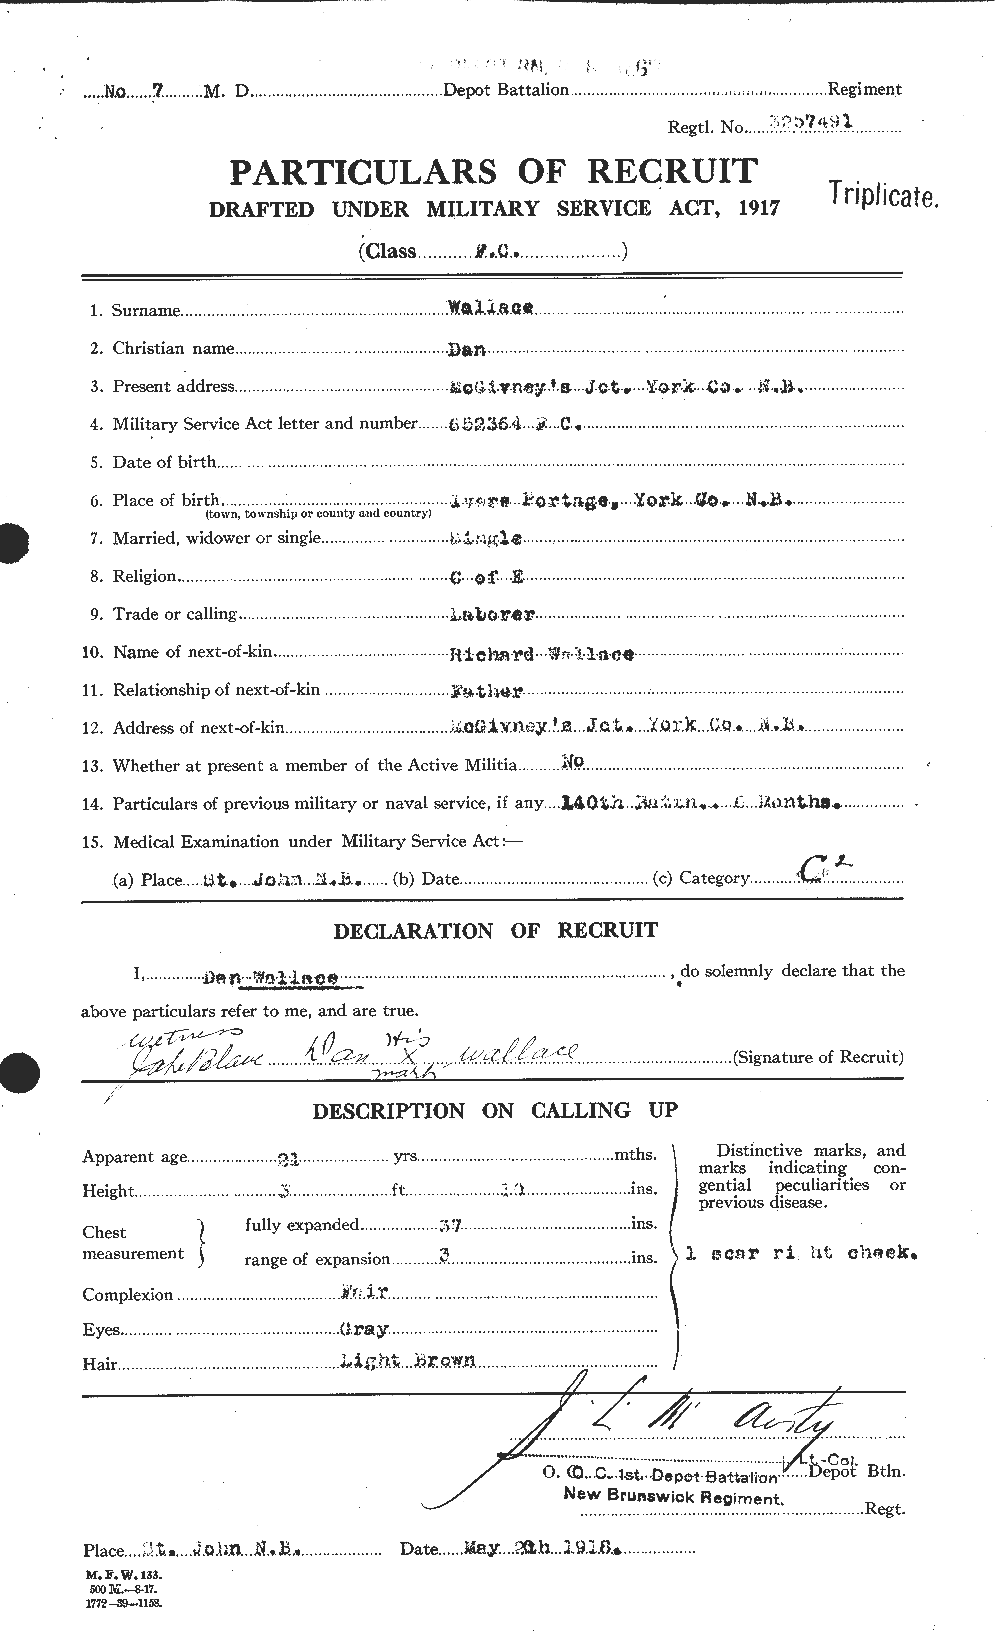 Personnel Records of the First World War - CEF 650384a